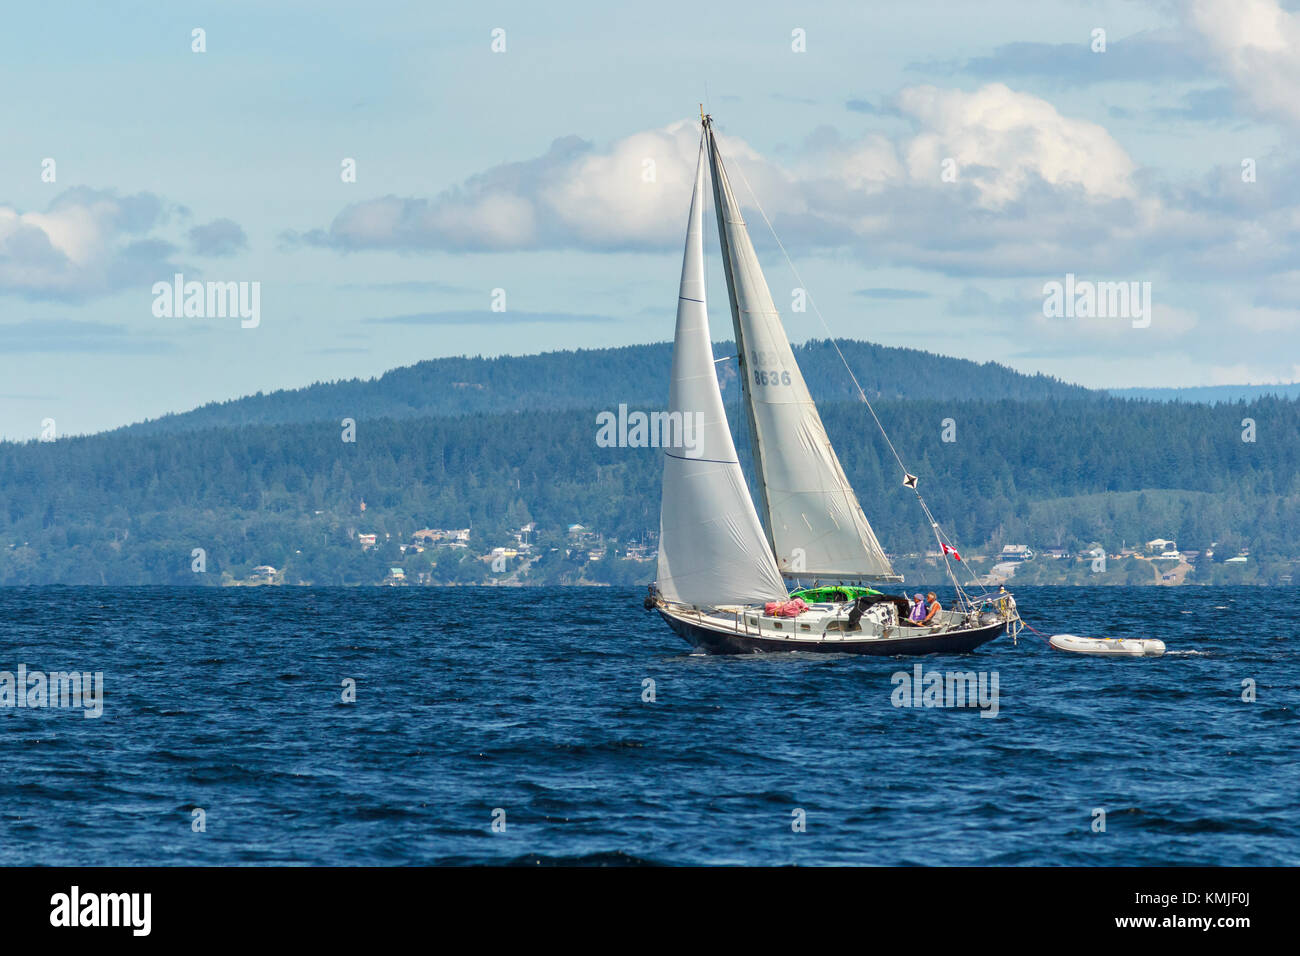 On a summer day, a middle-aged couple are at the helm of a Canadian yacht under sail in Malaspina Strait, near Powell River, British Columbia. Stock Photo